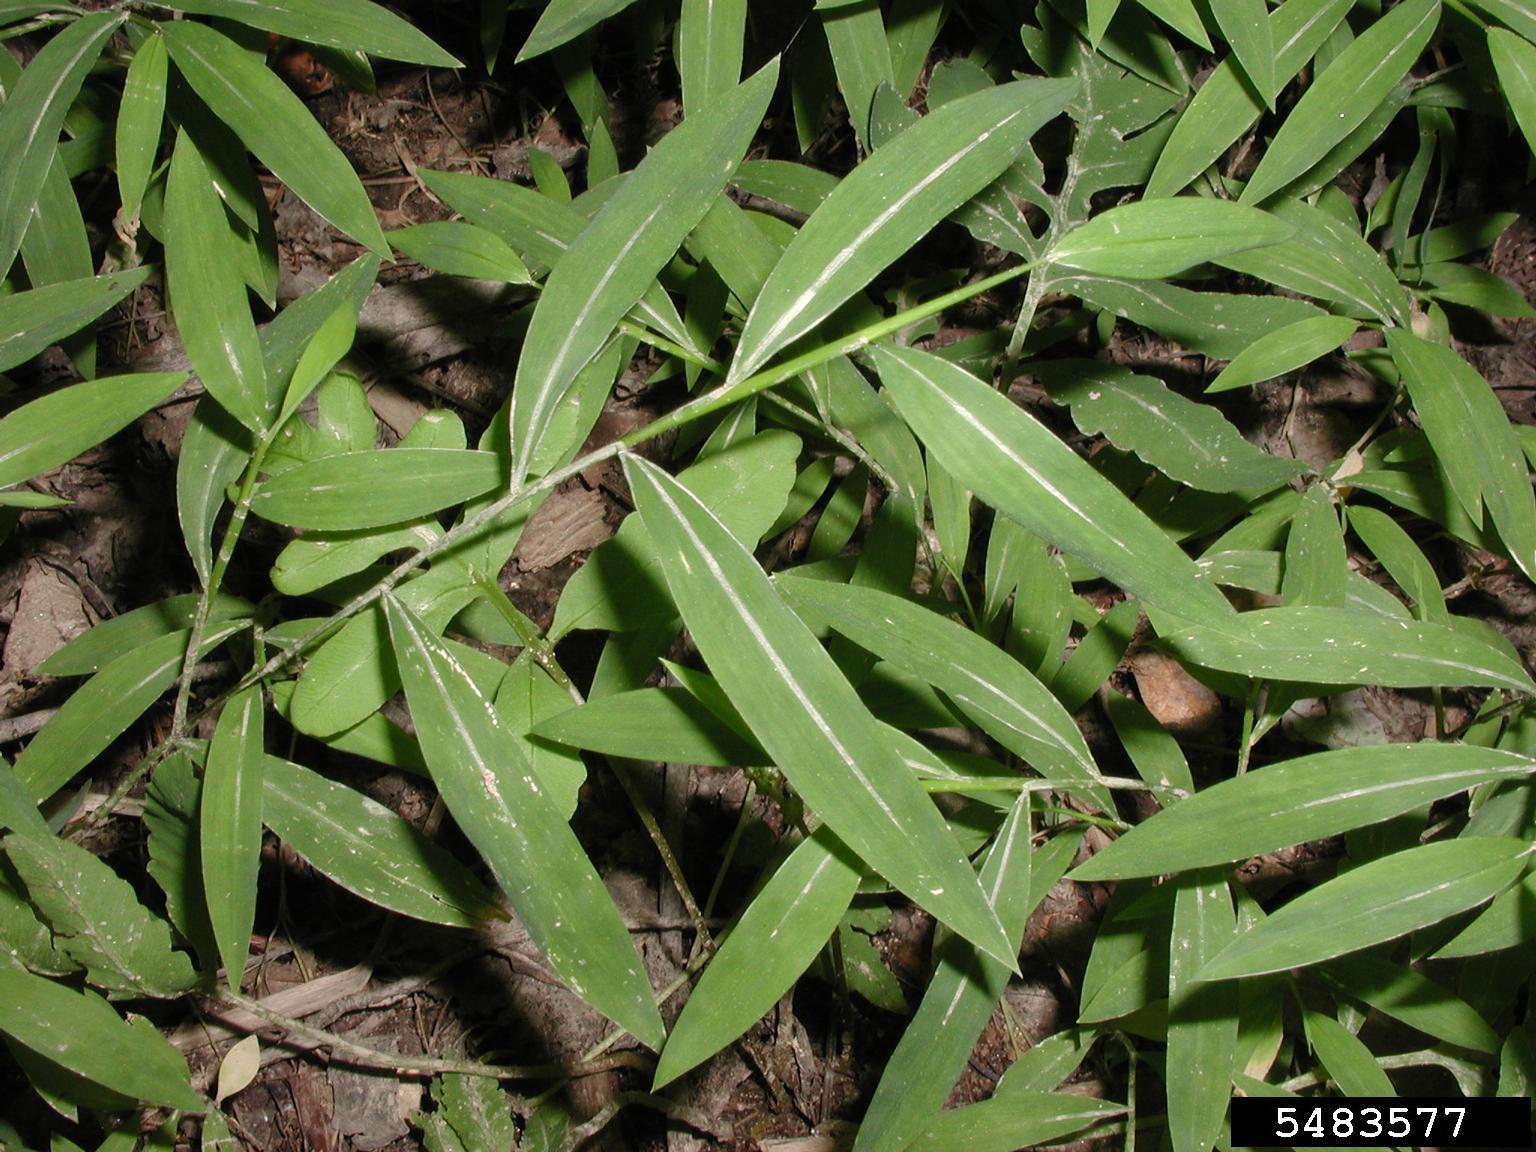 Image of Japanese Stiltgrass leaves. Leaves are arranged alternately on the stem, and have smooth edges. They are dark green with a pale midrib.